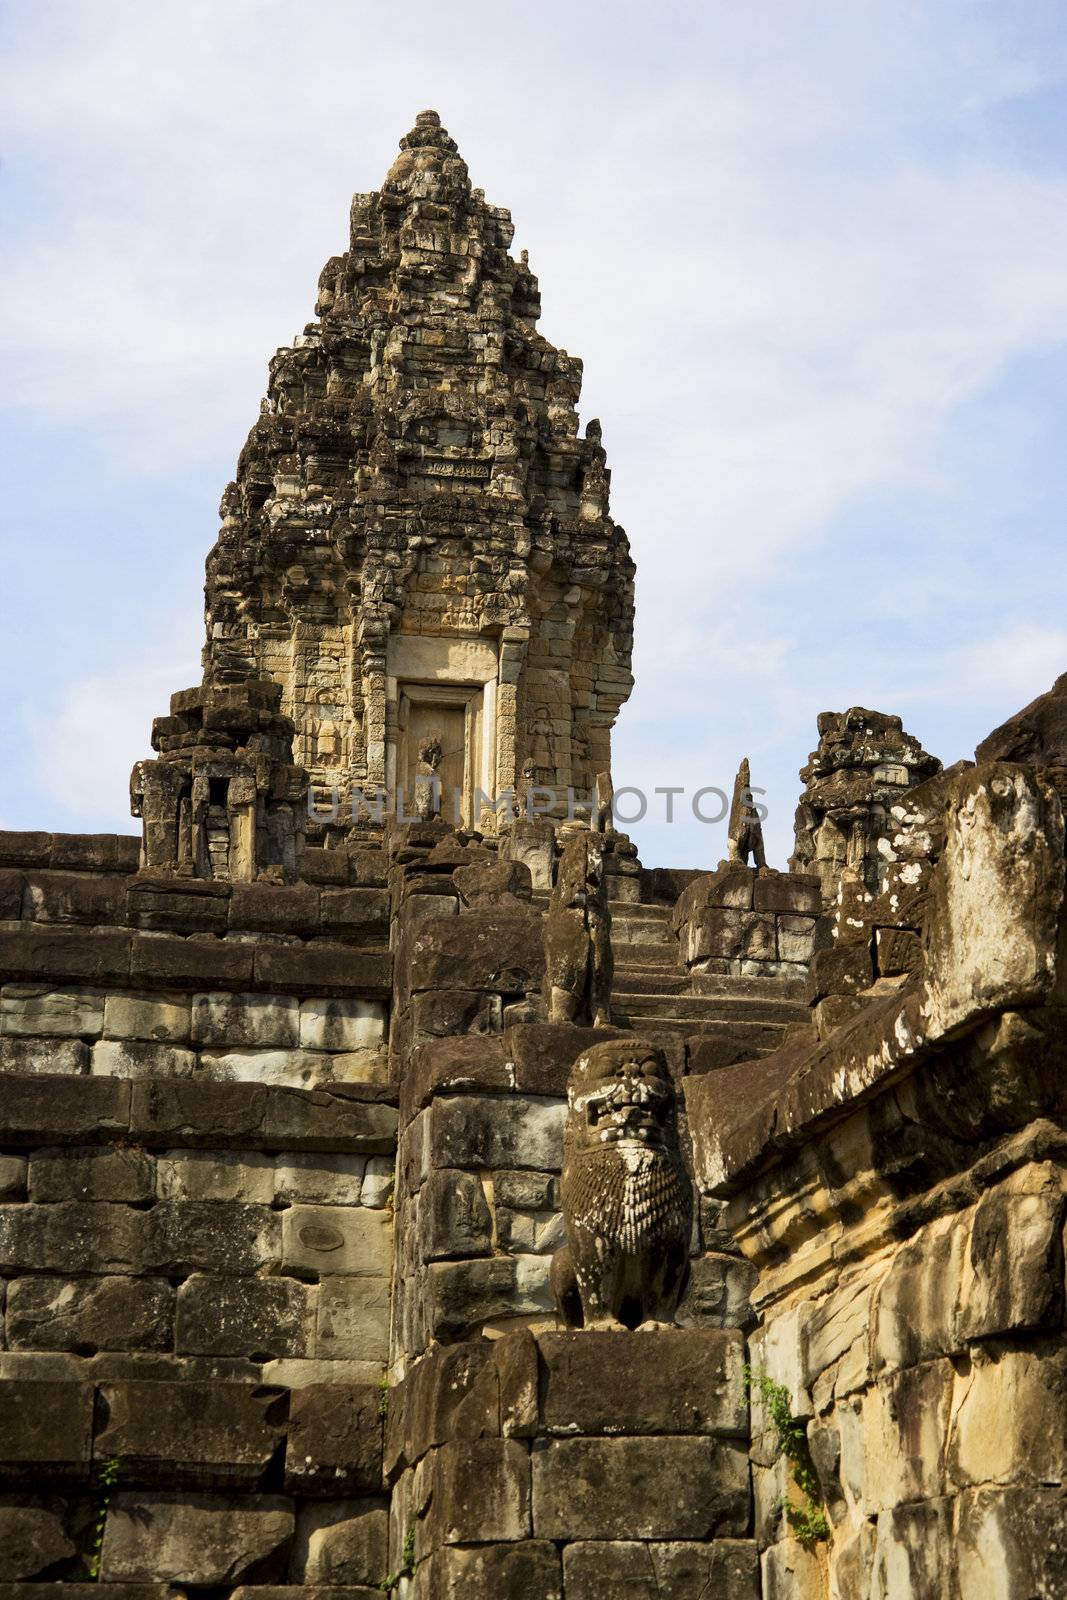 Image of UNESCO's World Heritage Site of Preah Ko, located at Siem Reap, Cambodia.